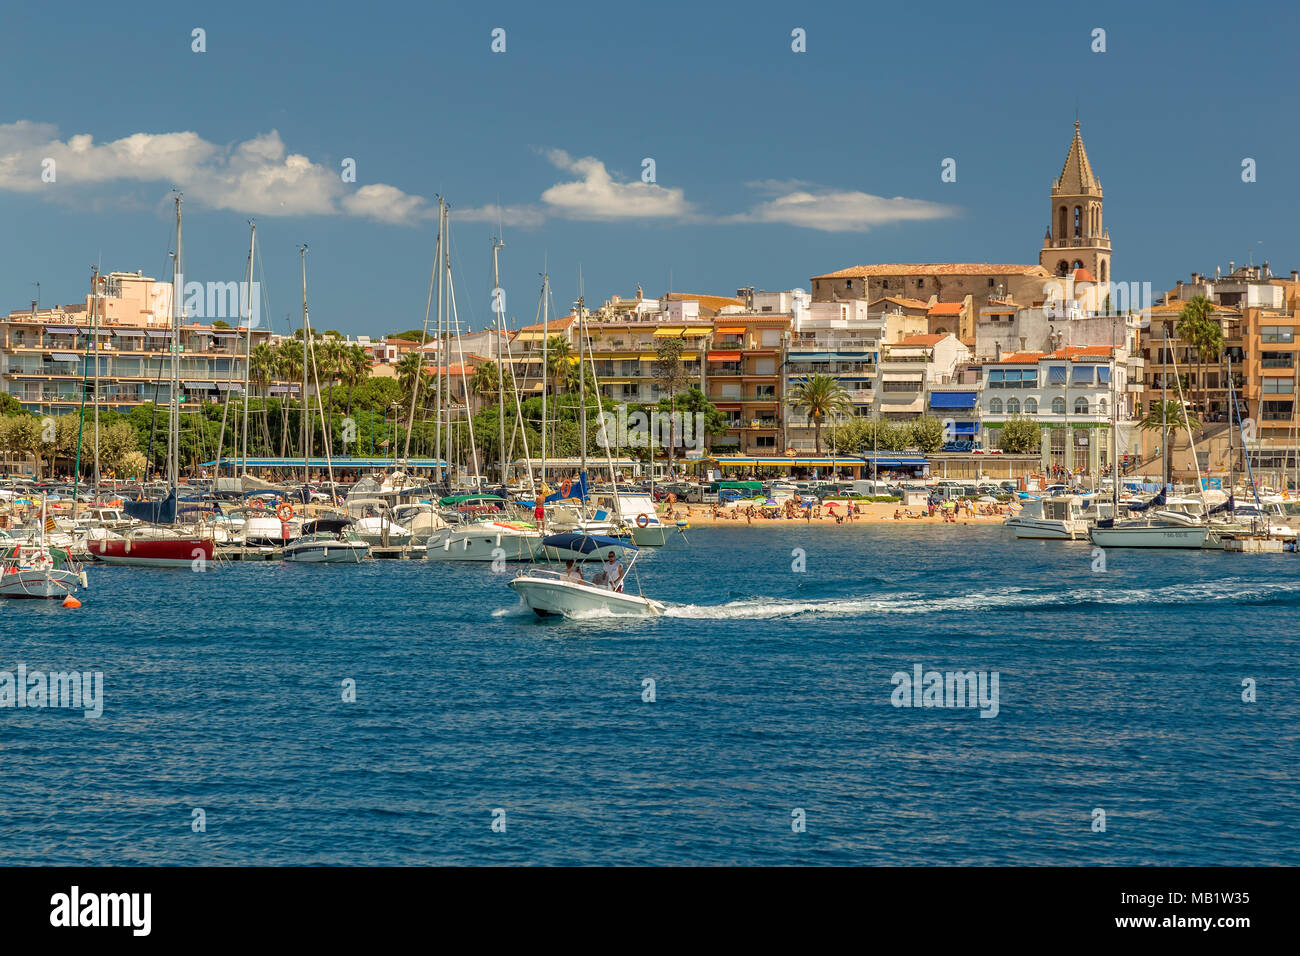 Nice summer picture from a small Spanish town in Costa Brava, Palamos. 10. 08. 2017 Spain Stock Photo